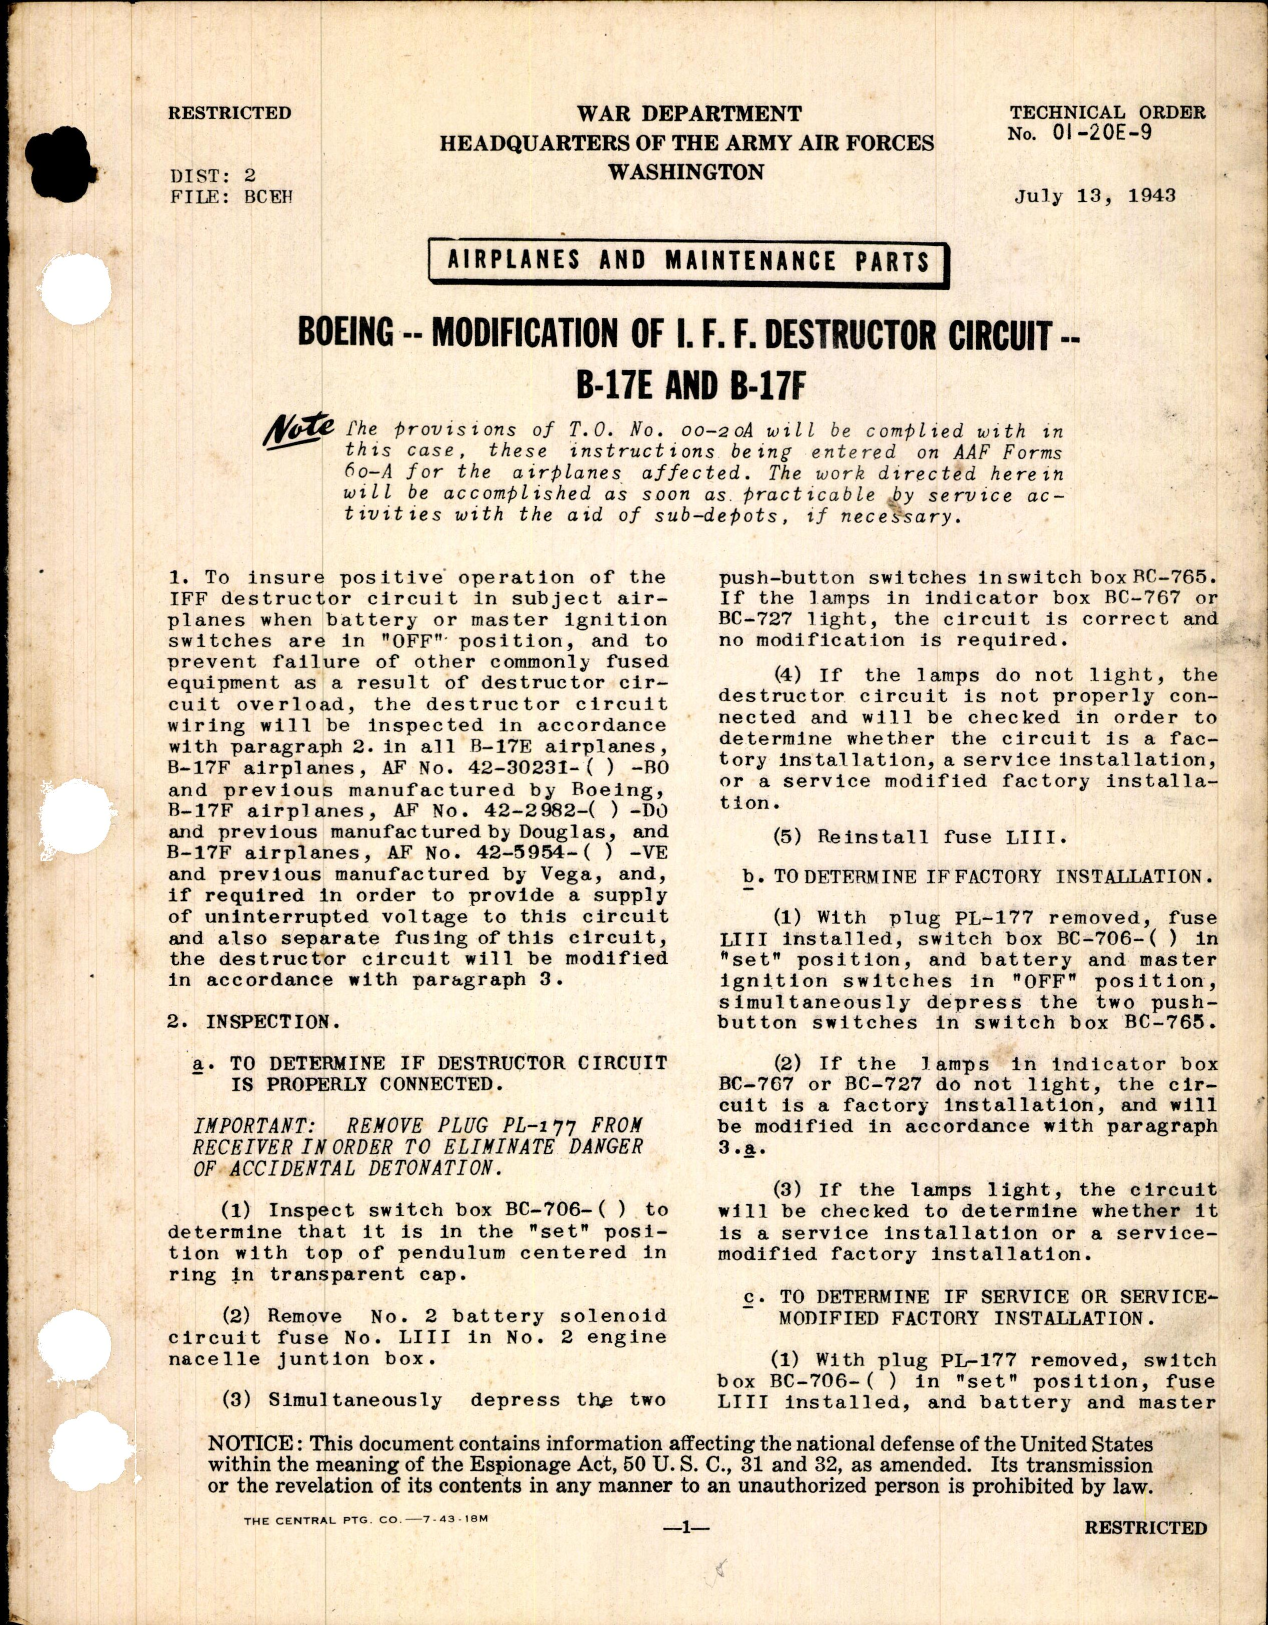 Sample page 1 from AirCorps Library document: Modification of I.F.F. Destructor Circuit for B-17E and B-17F